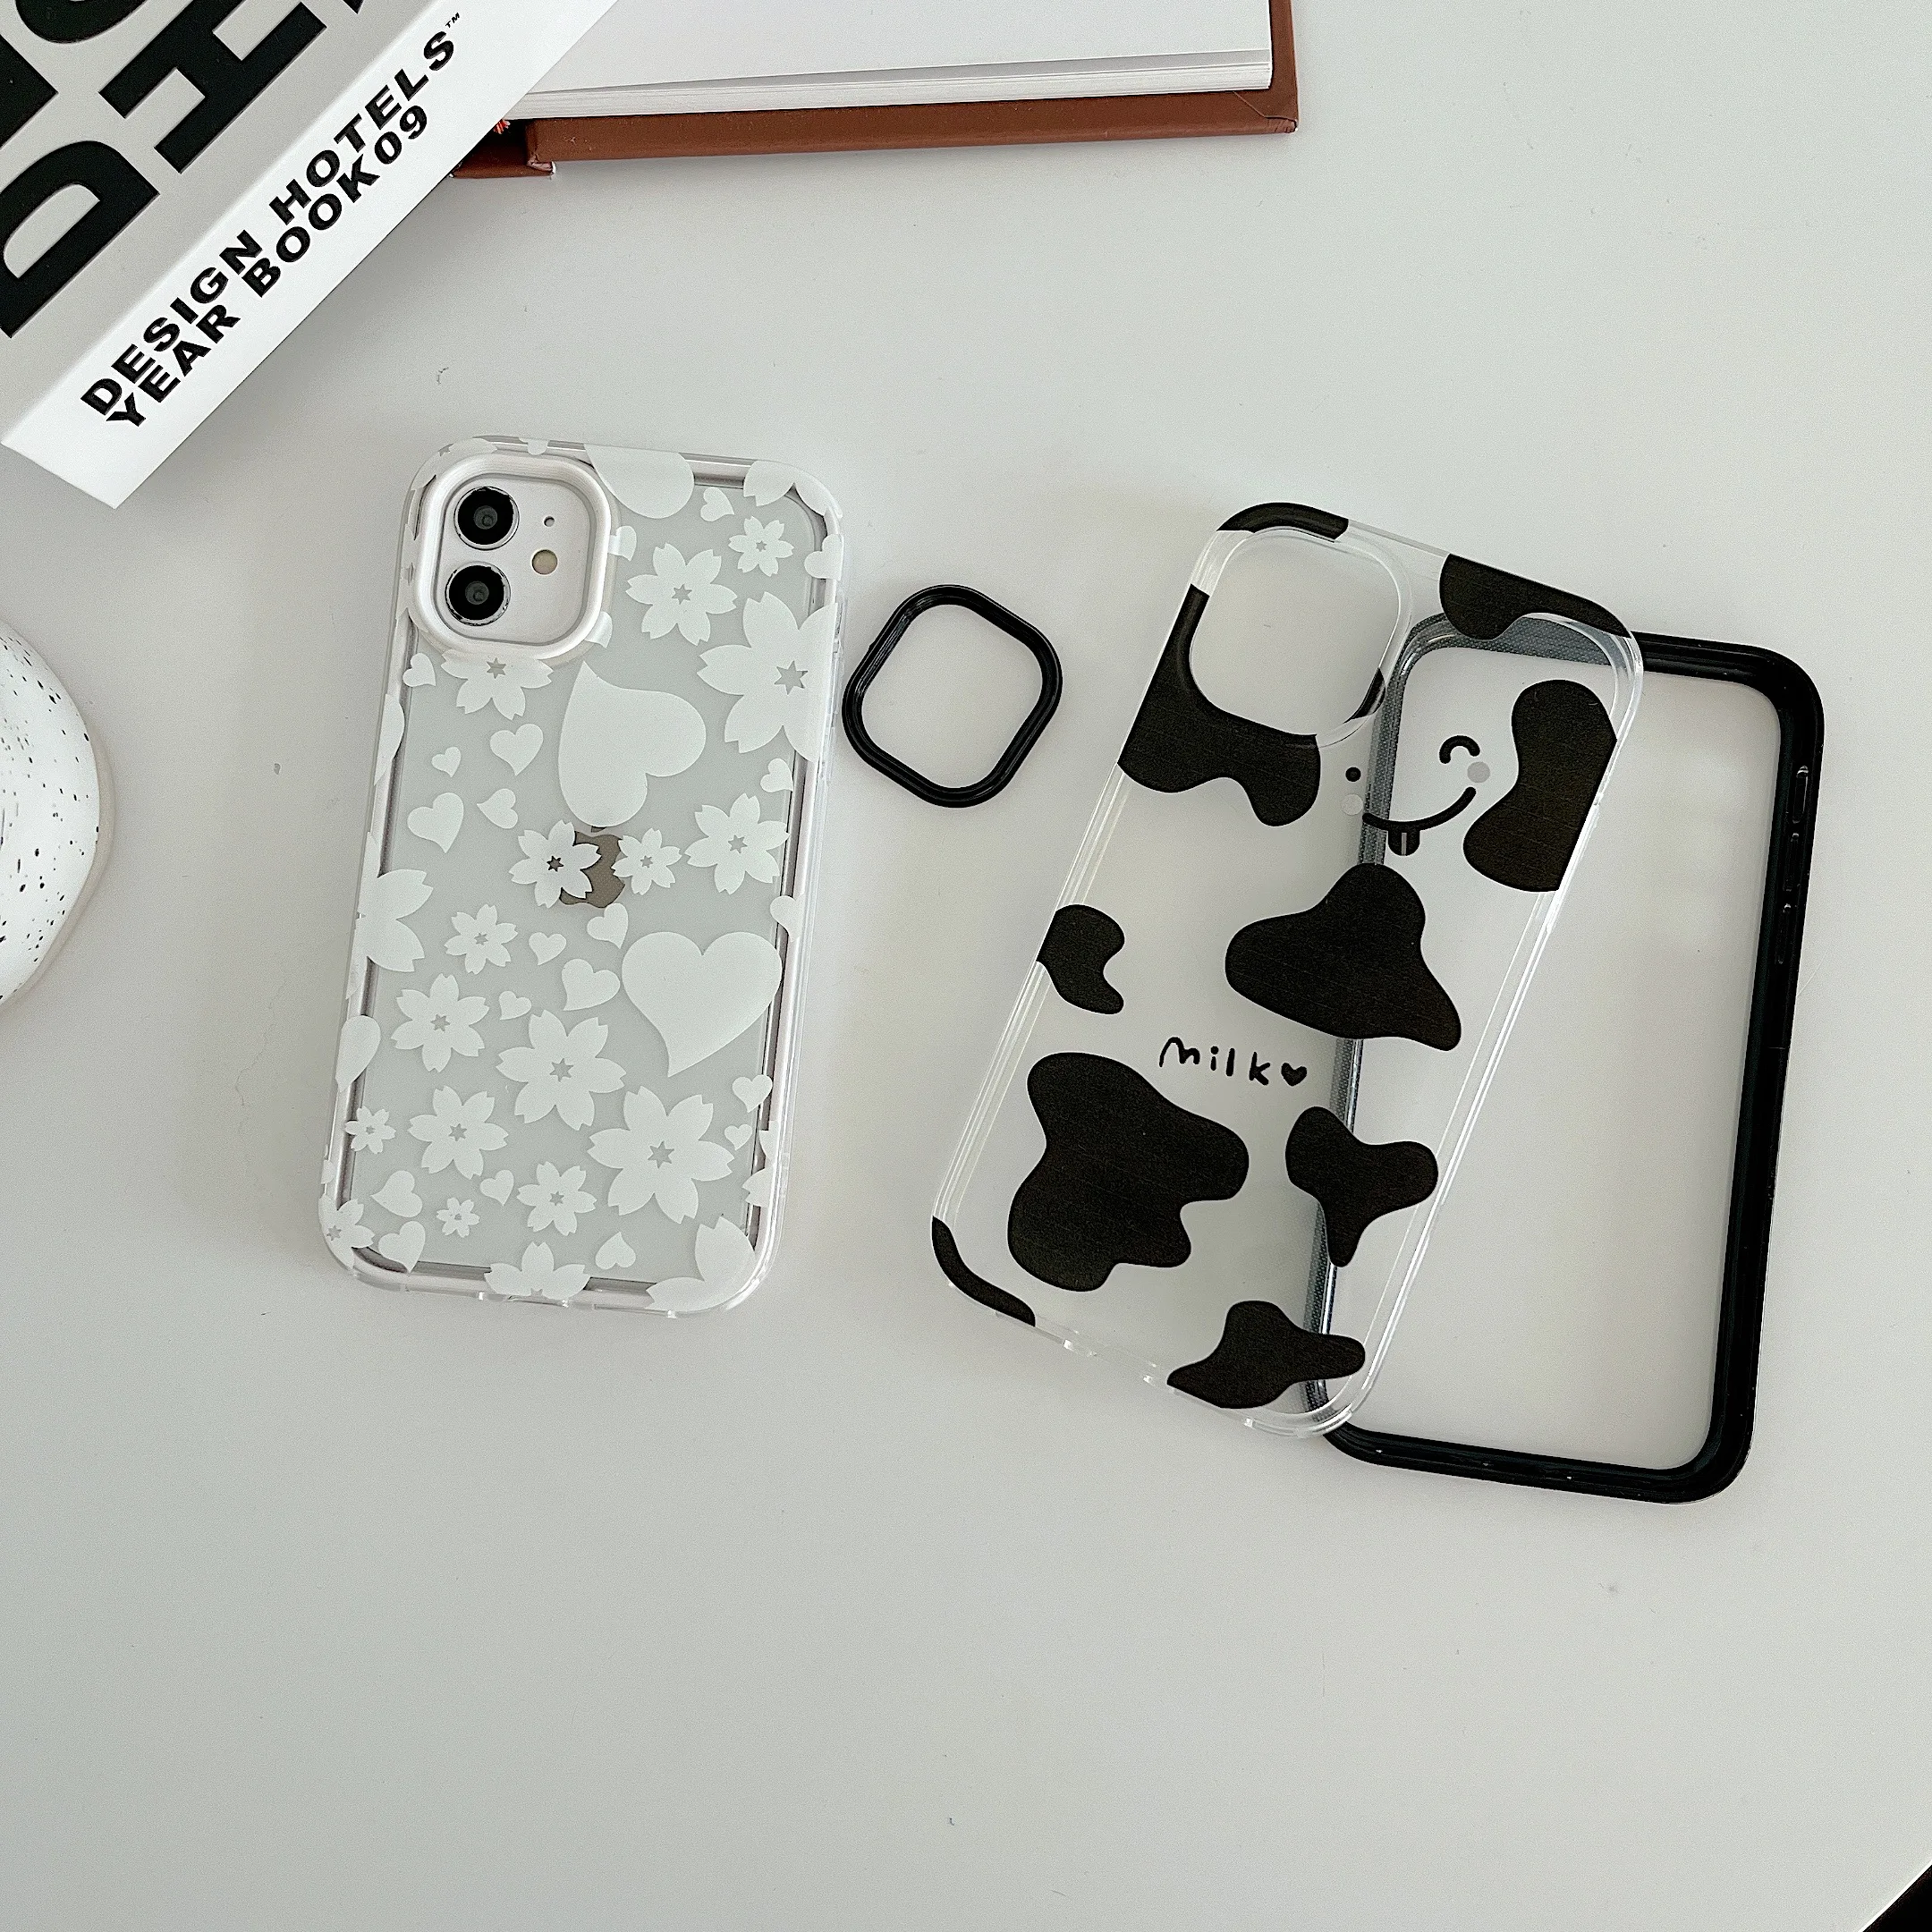 3 IN 1 Heart Silicone Case For iPhone 13 Pro Max Flower Silicone Case for iPhone 12 Pro чехол на айфон 11 Coque iPhone 13 Pro